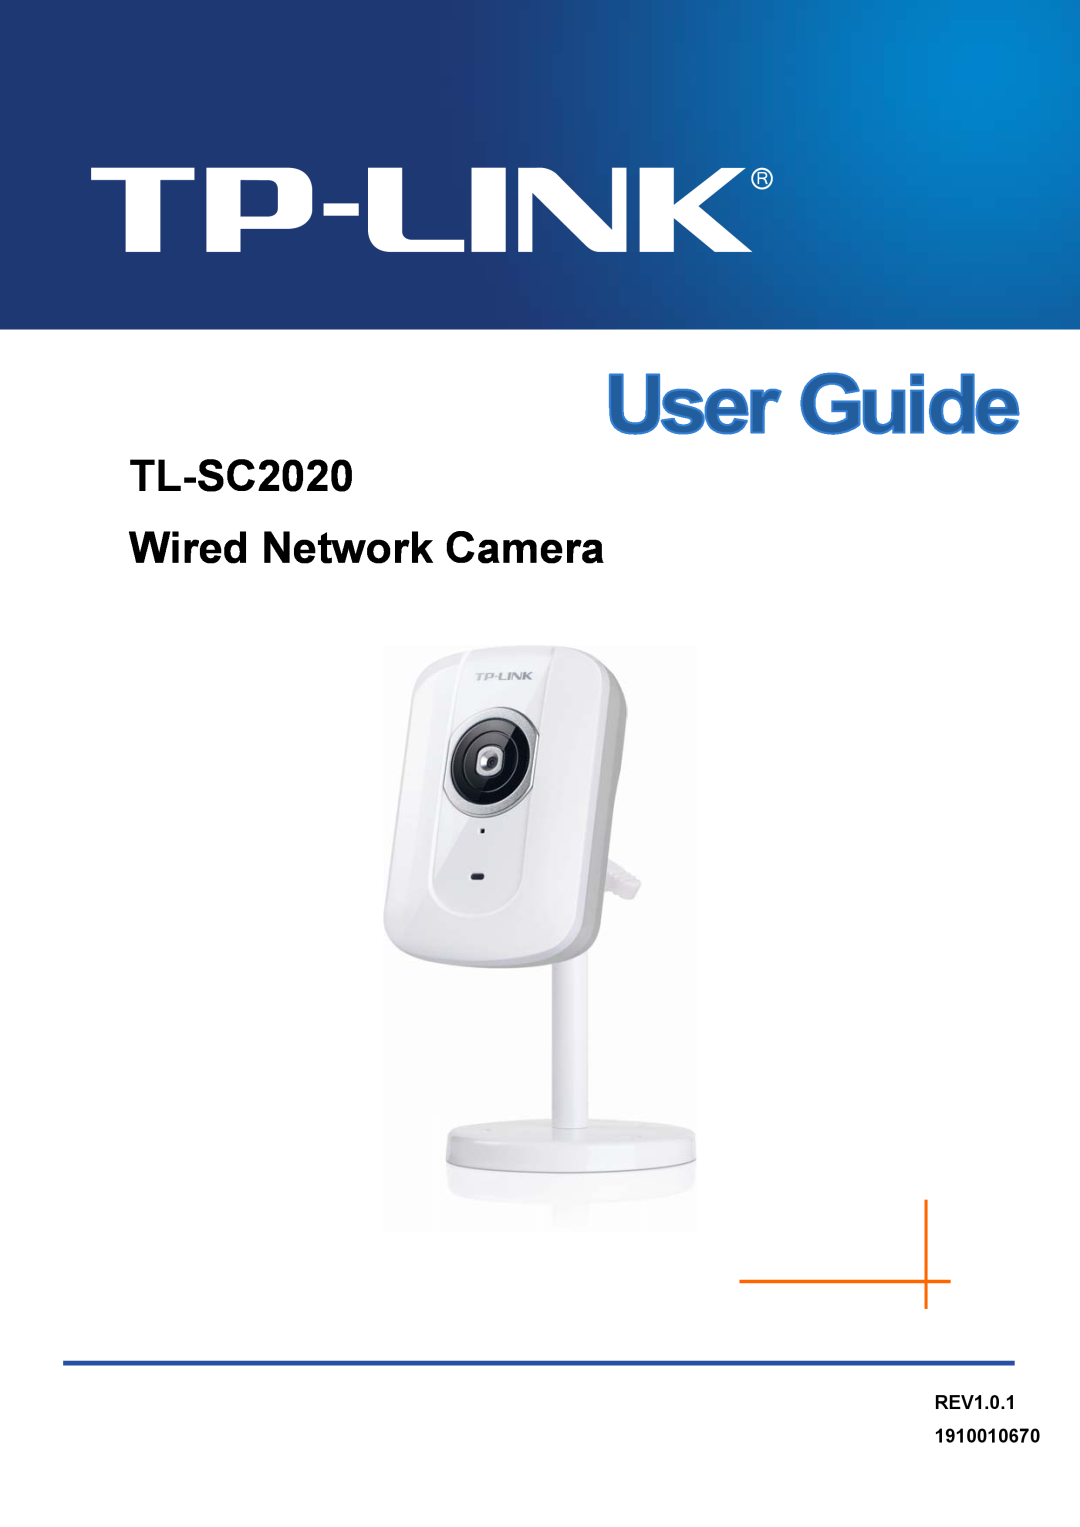 TP-Link manual TL-SC2020 Wired Network Camera, REV1.0.1 1910010670 